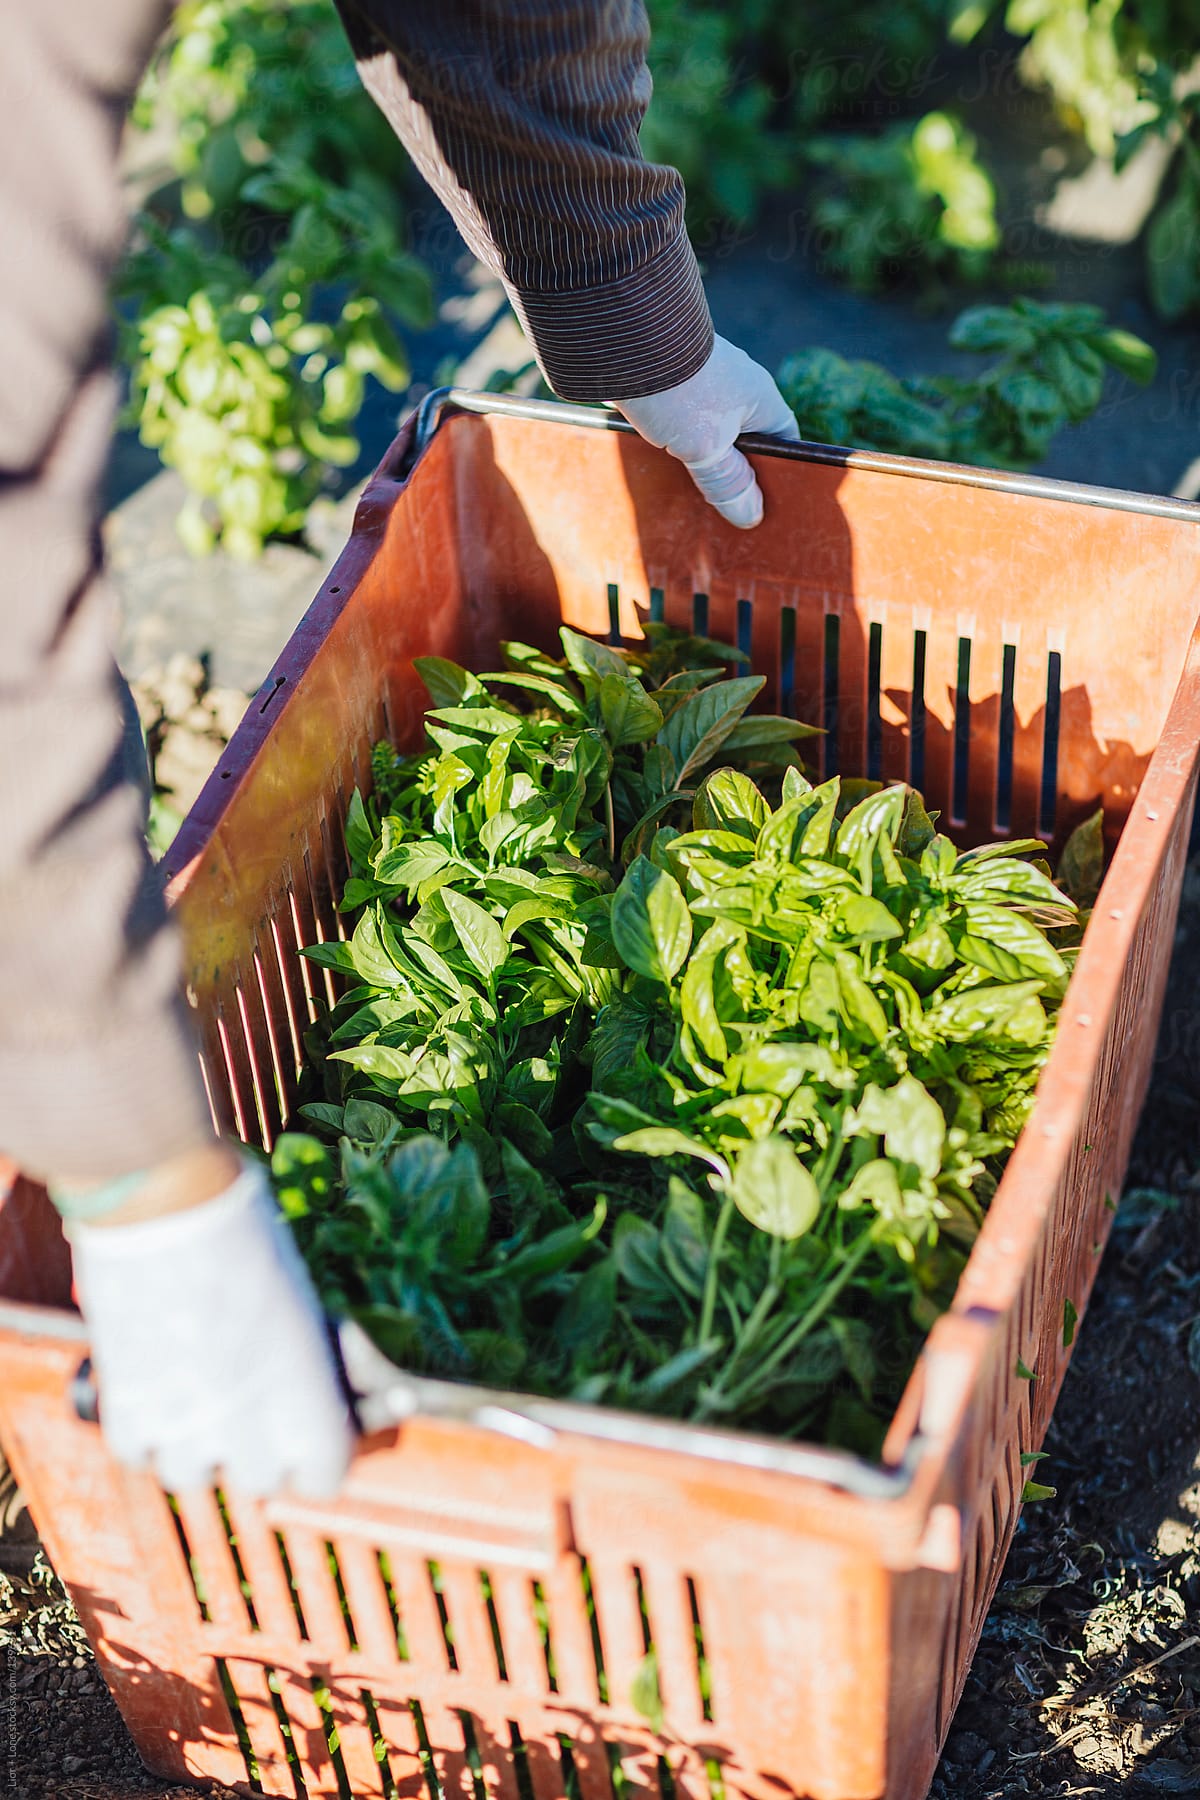 hands picking crate of fresh basil